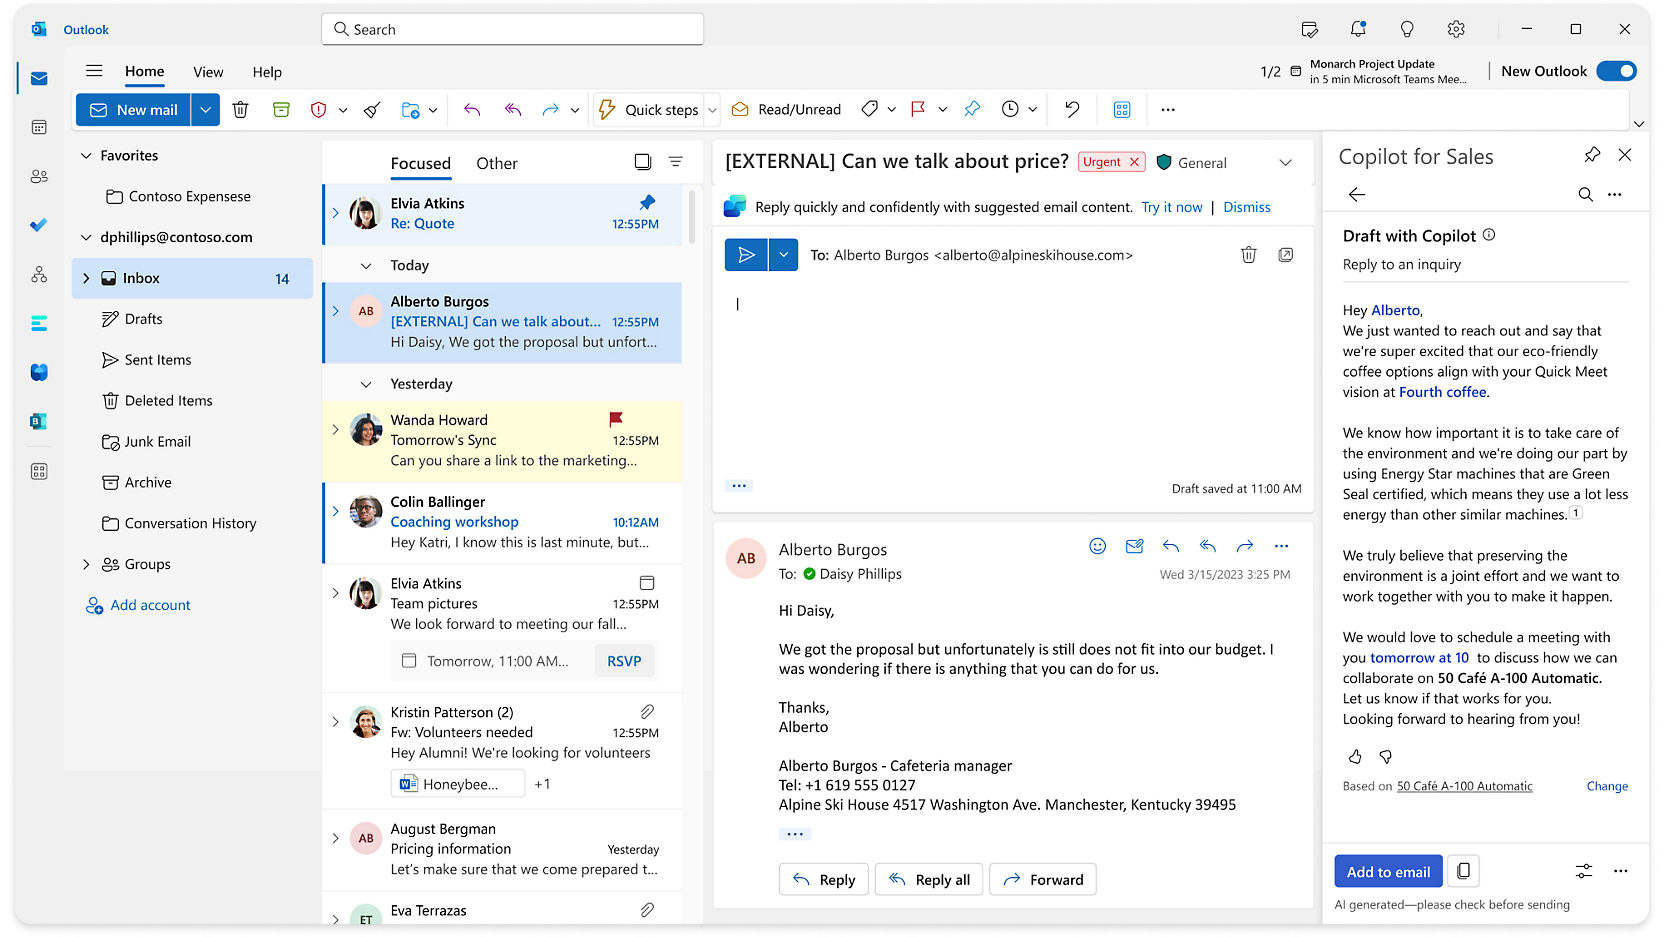 A screenshot of the microsoft outlook email app.